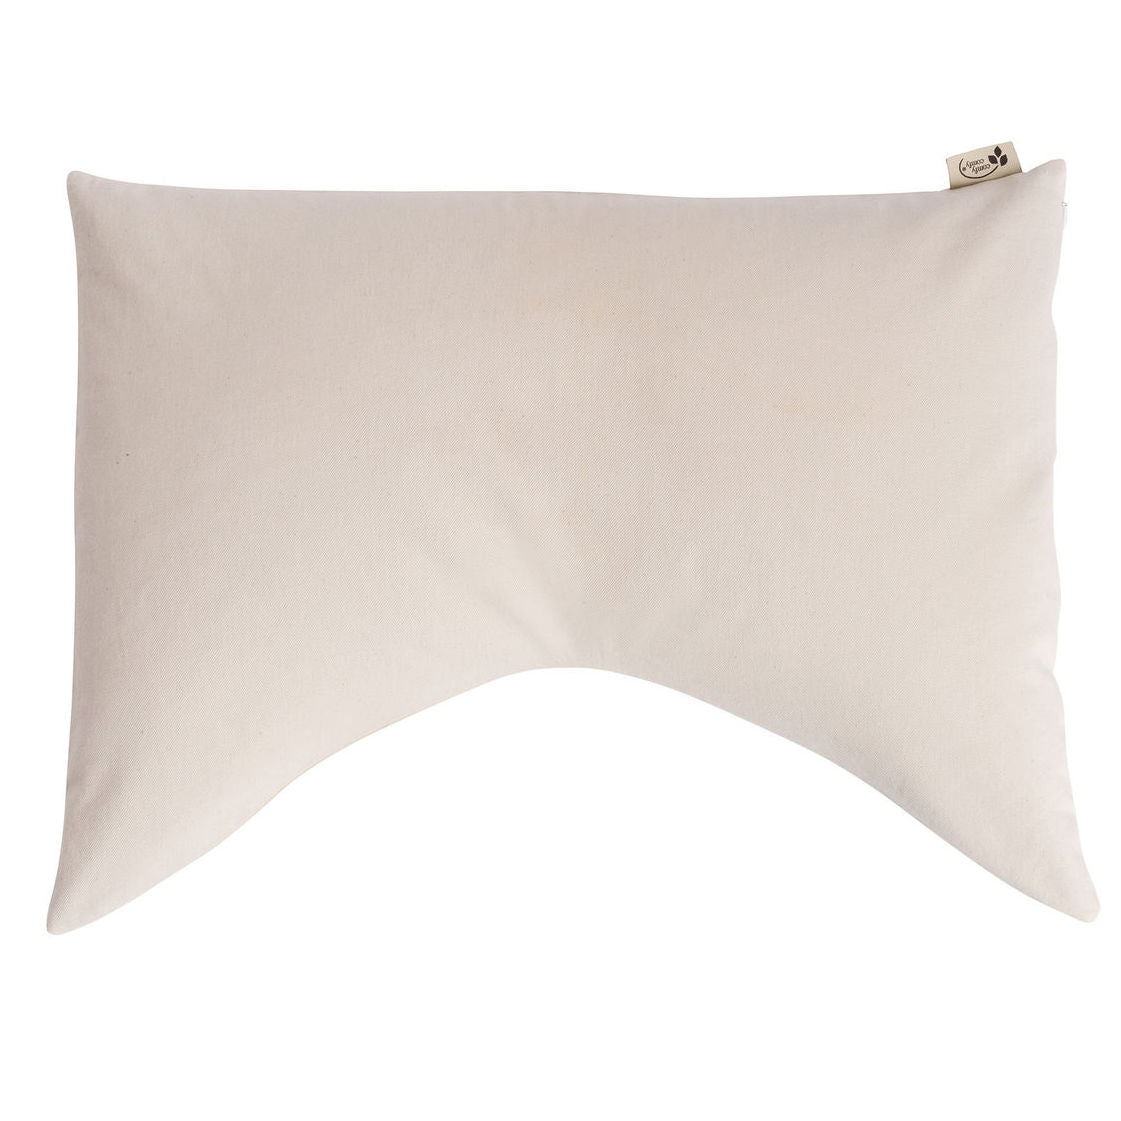 Organic Cotton Twill Winter White Throw Pillows - 14 in X 22 in